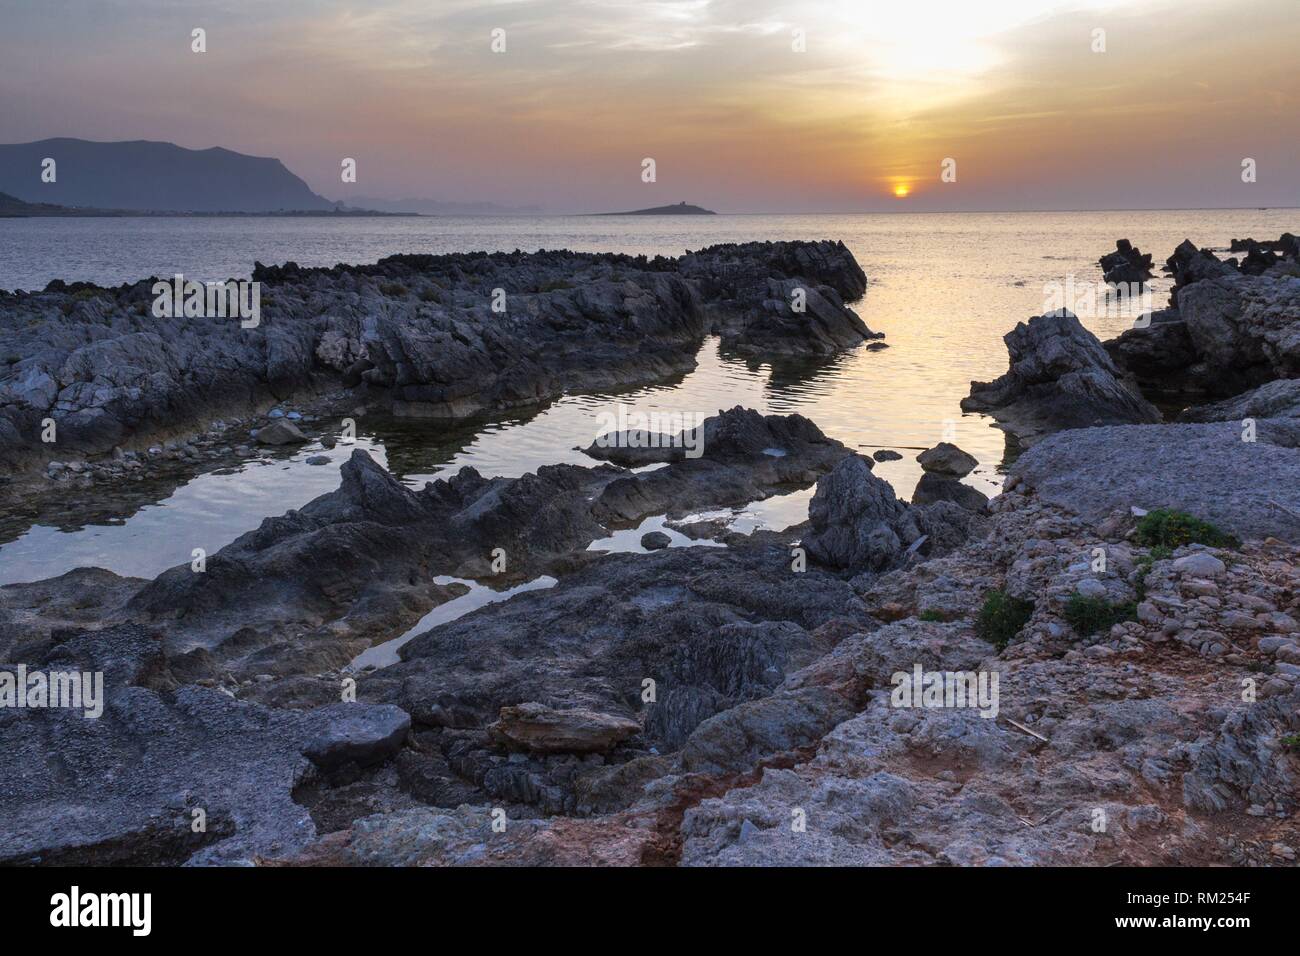 A striking view of Island of ladies at dusk. Palermo, Sicily. Italy. Stock Photo